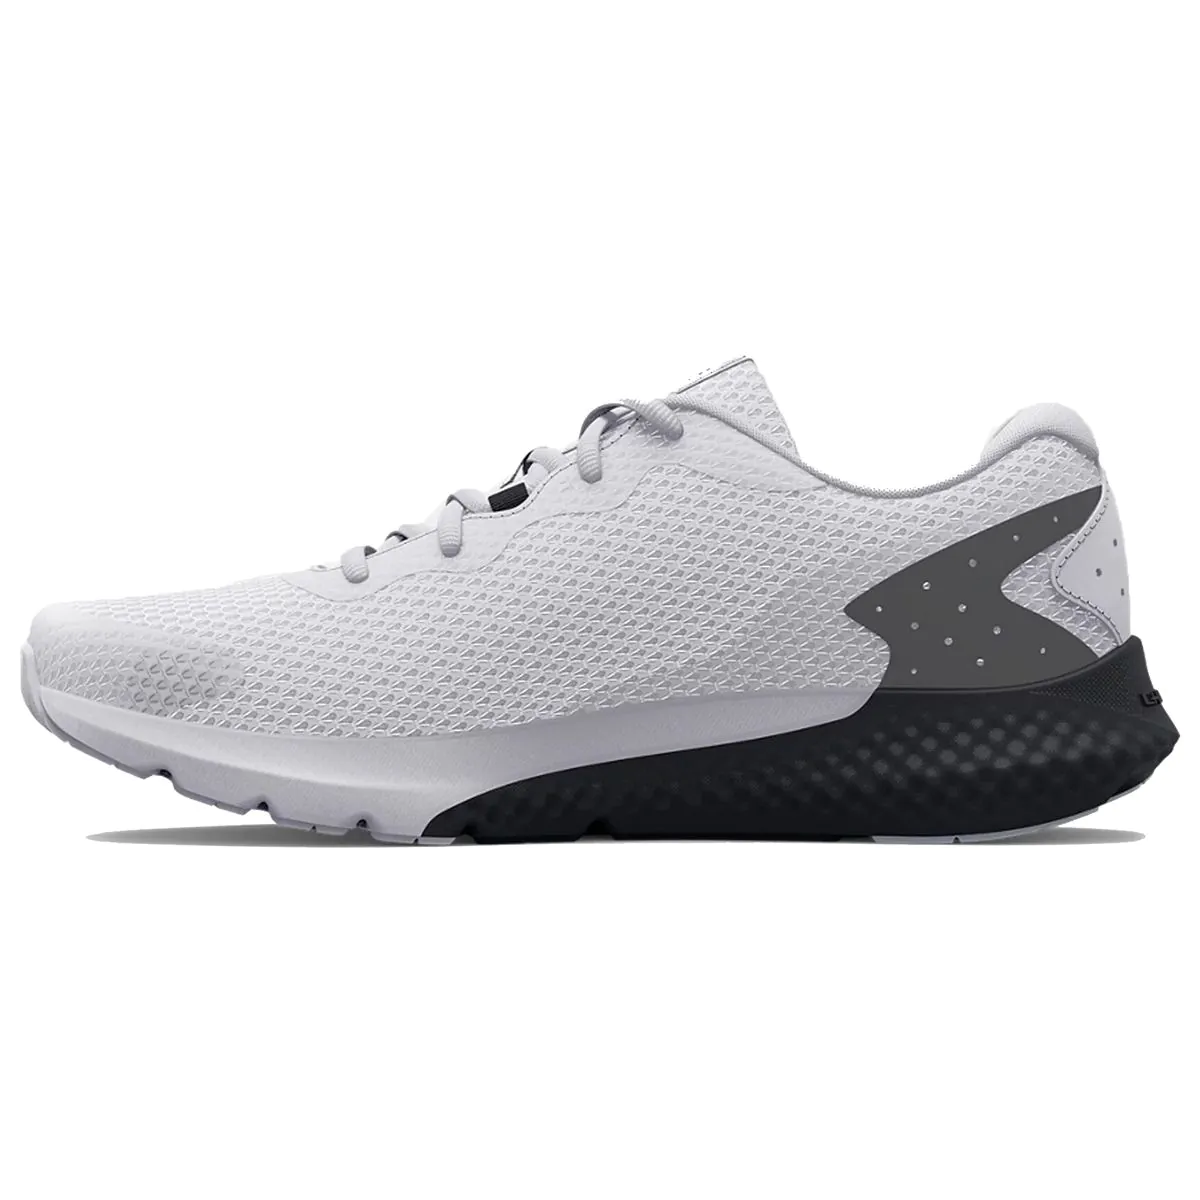 Under Armour Charged Rogue 3 men's running shoes · Sport · El Corte Inglés